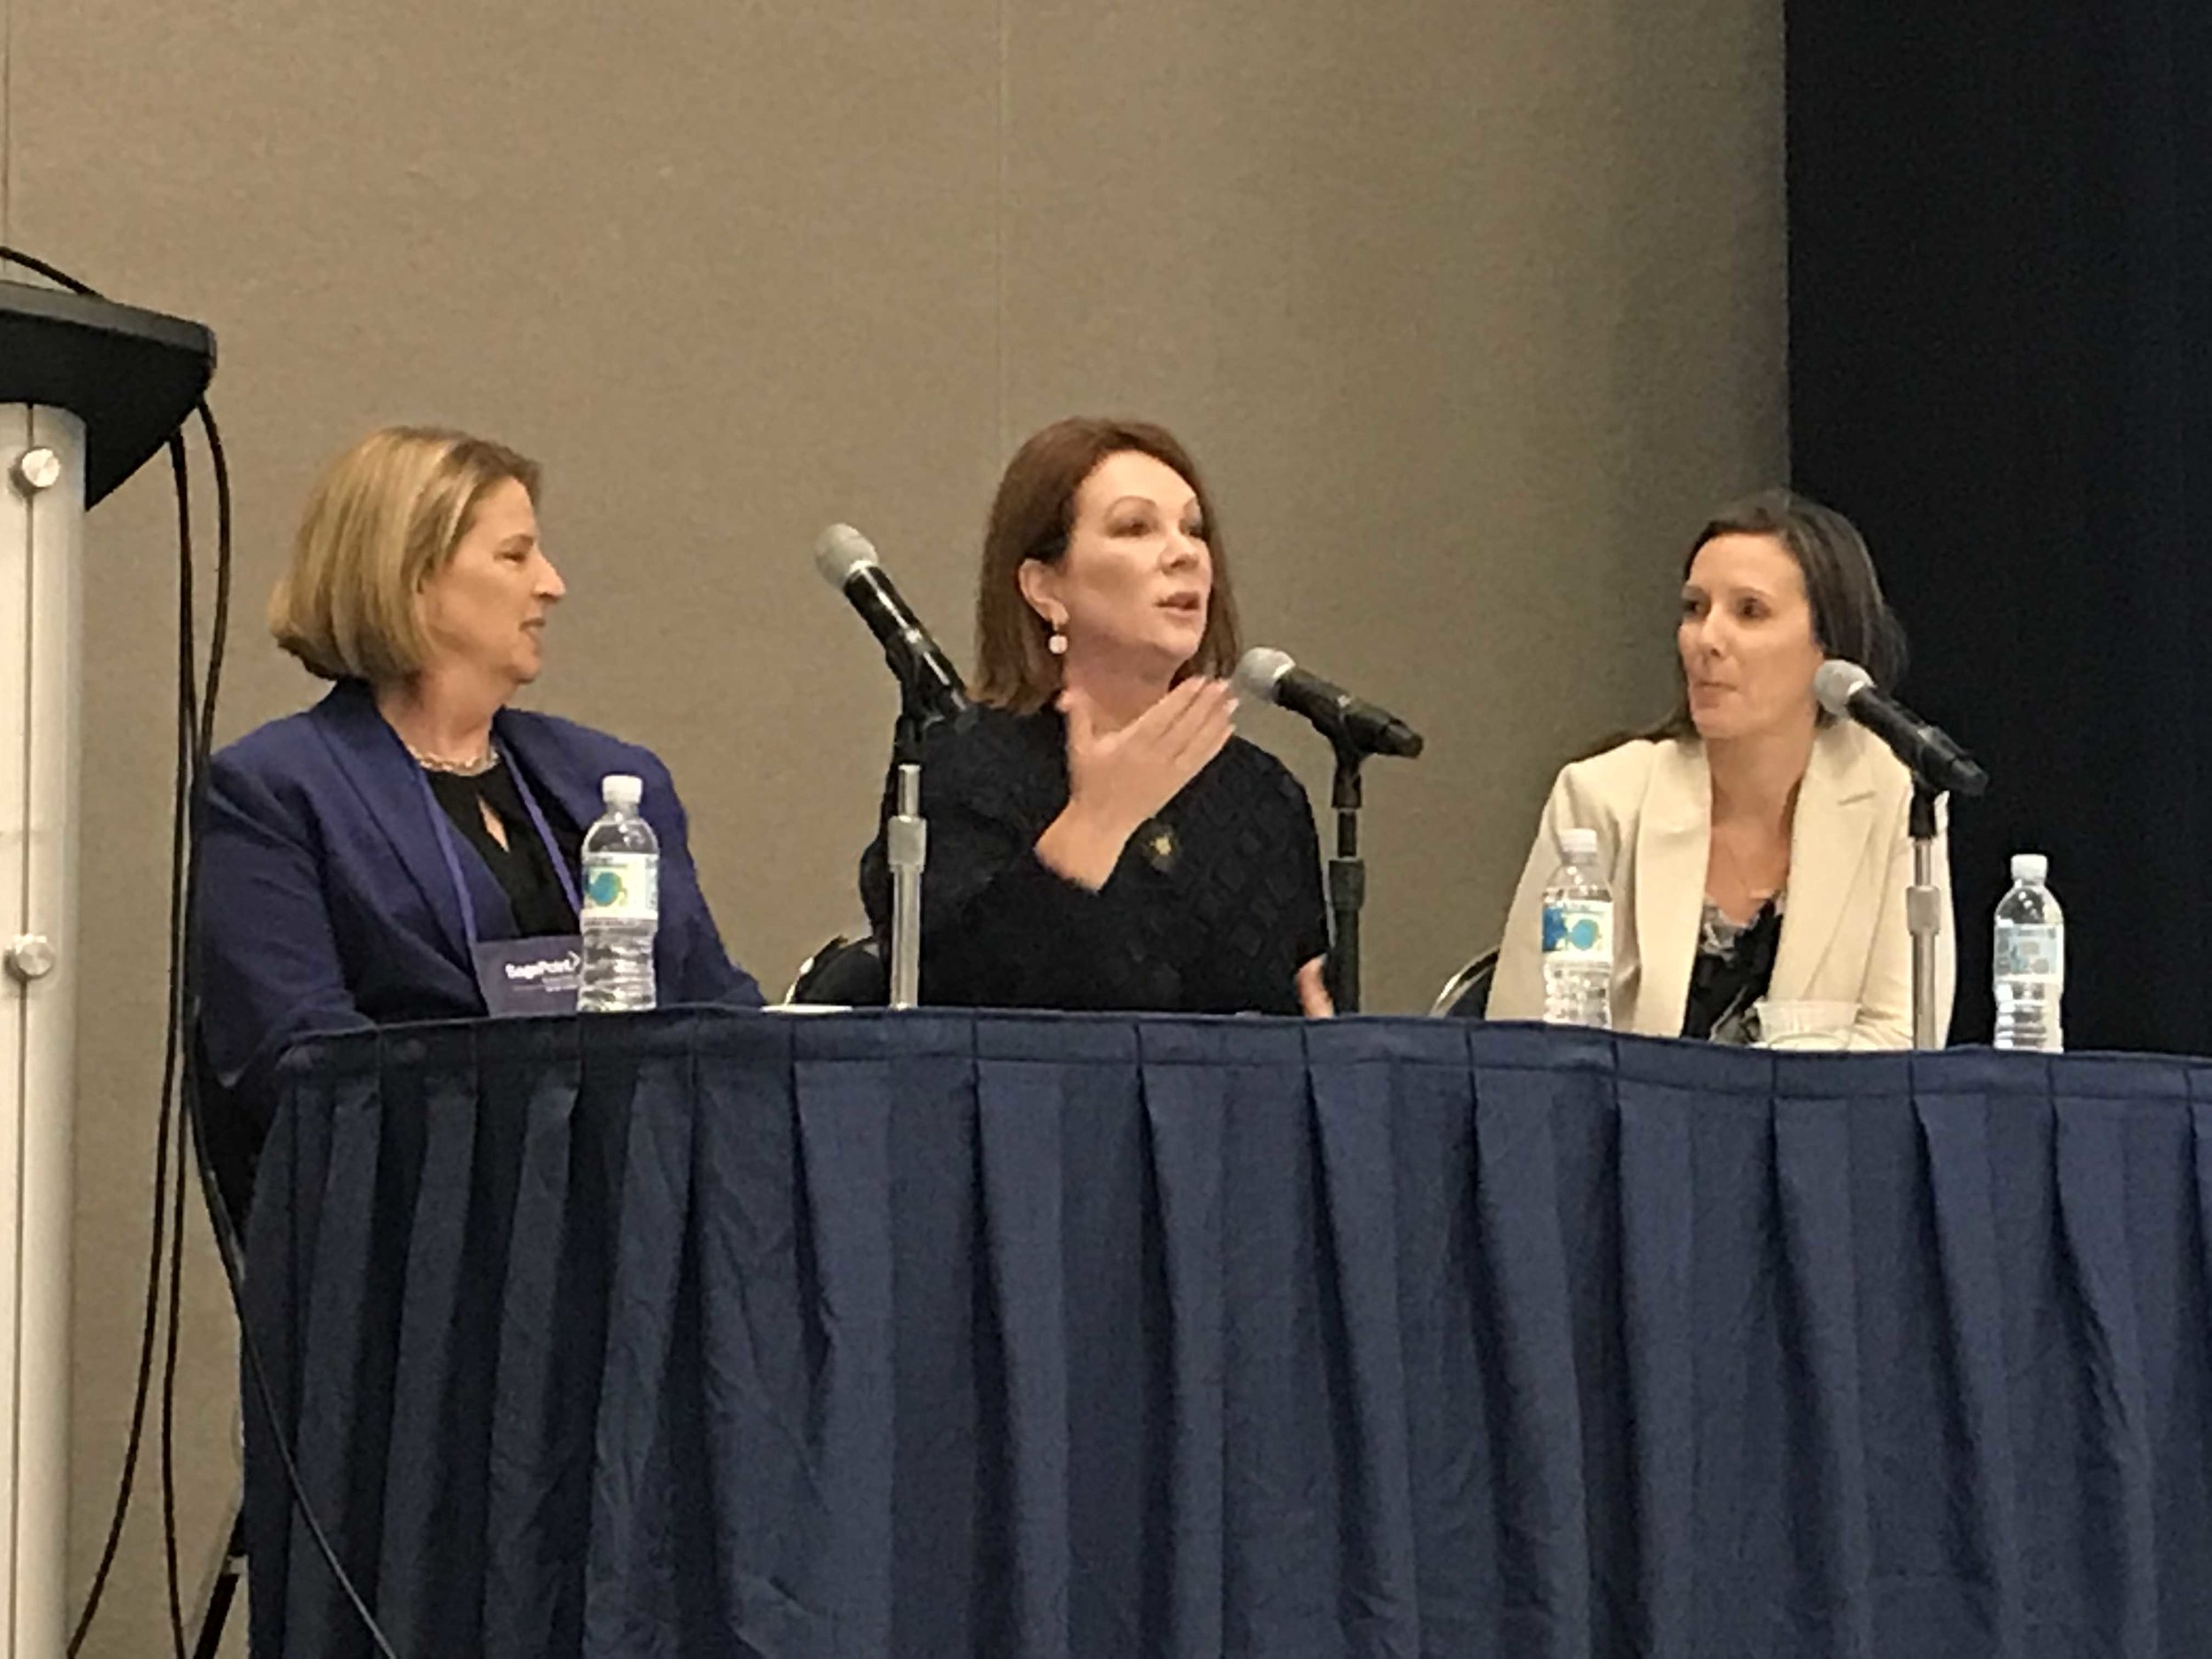  Frisco, Plano, Allen, McKinney Chapter Head Michelle Brennan Hall (center) answering a question during Q &amp; A session in “Building a Female-Centric Professional Network: The Key to a Successful Practice” session at the Advisor Group ConnectEd Con